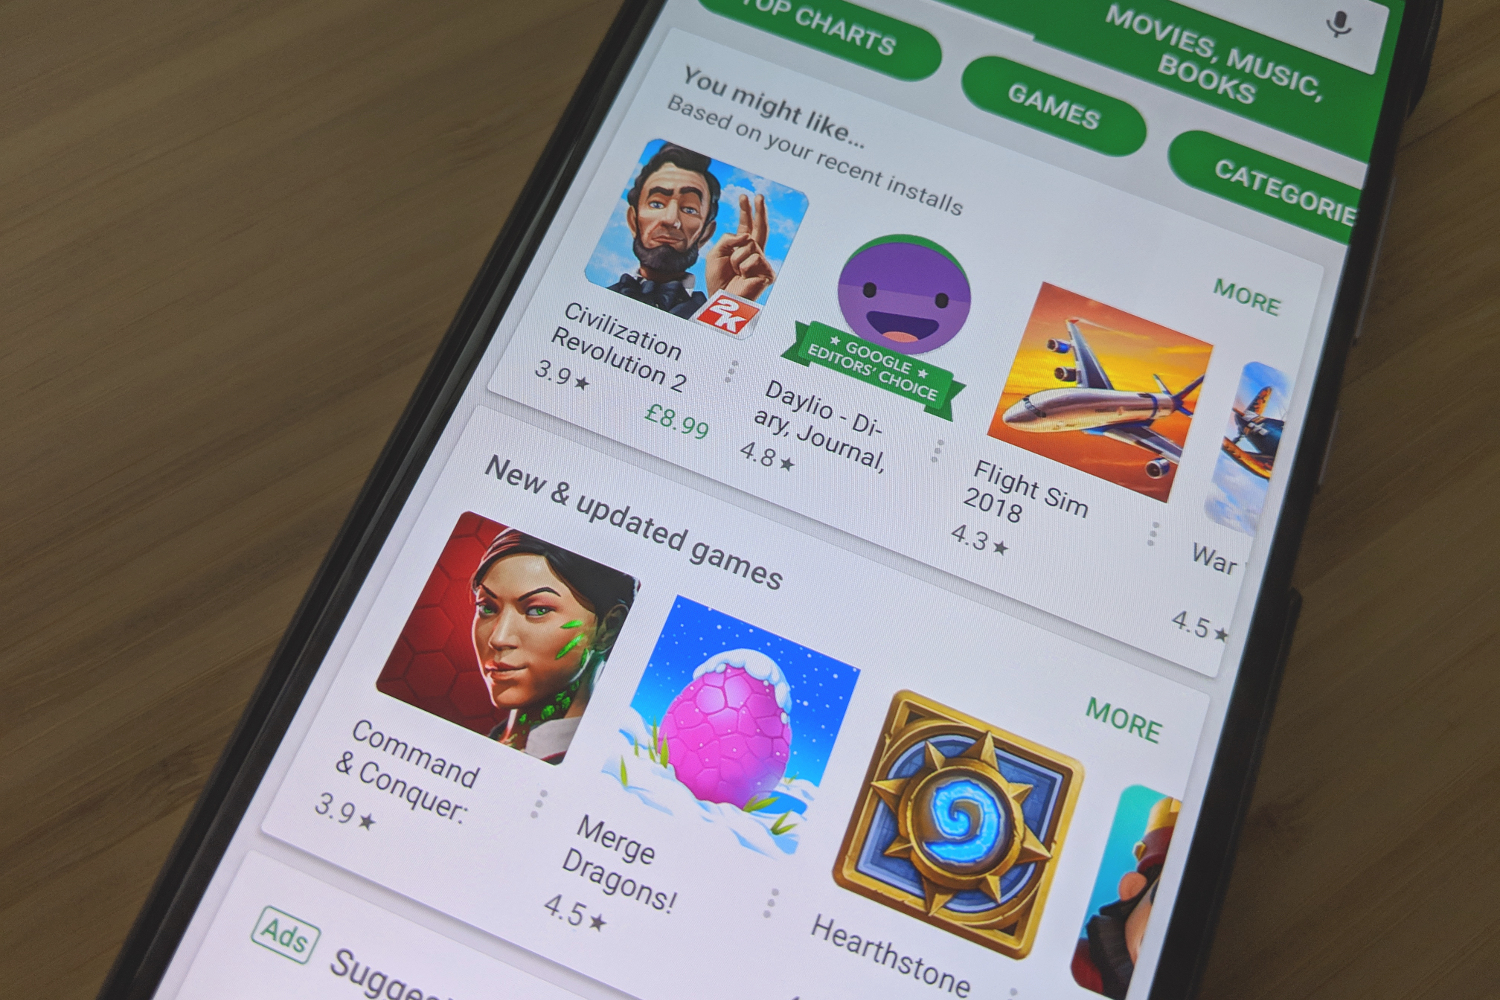 Google Play Store implemented new policy - Huawei Central